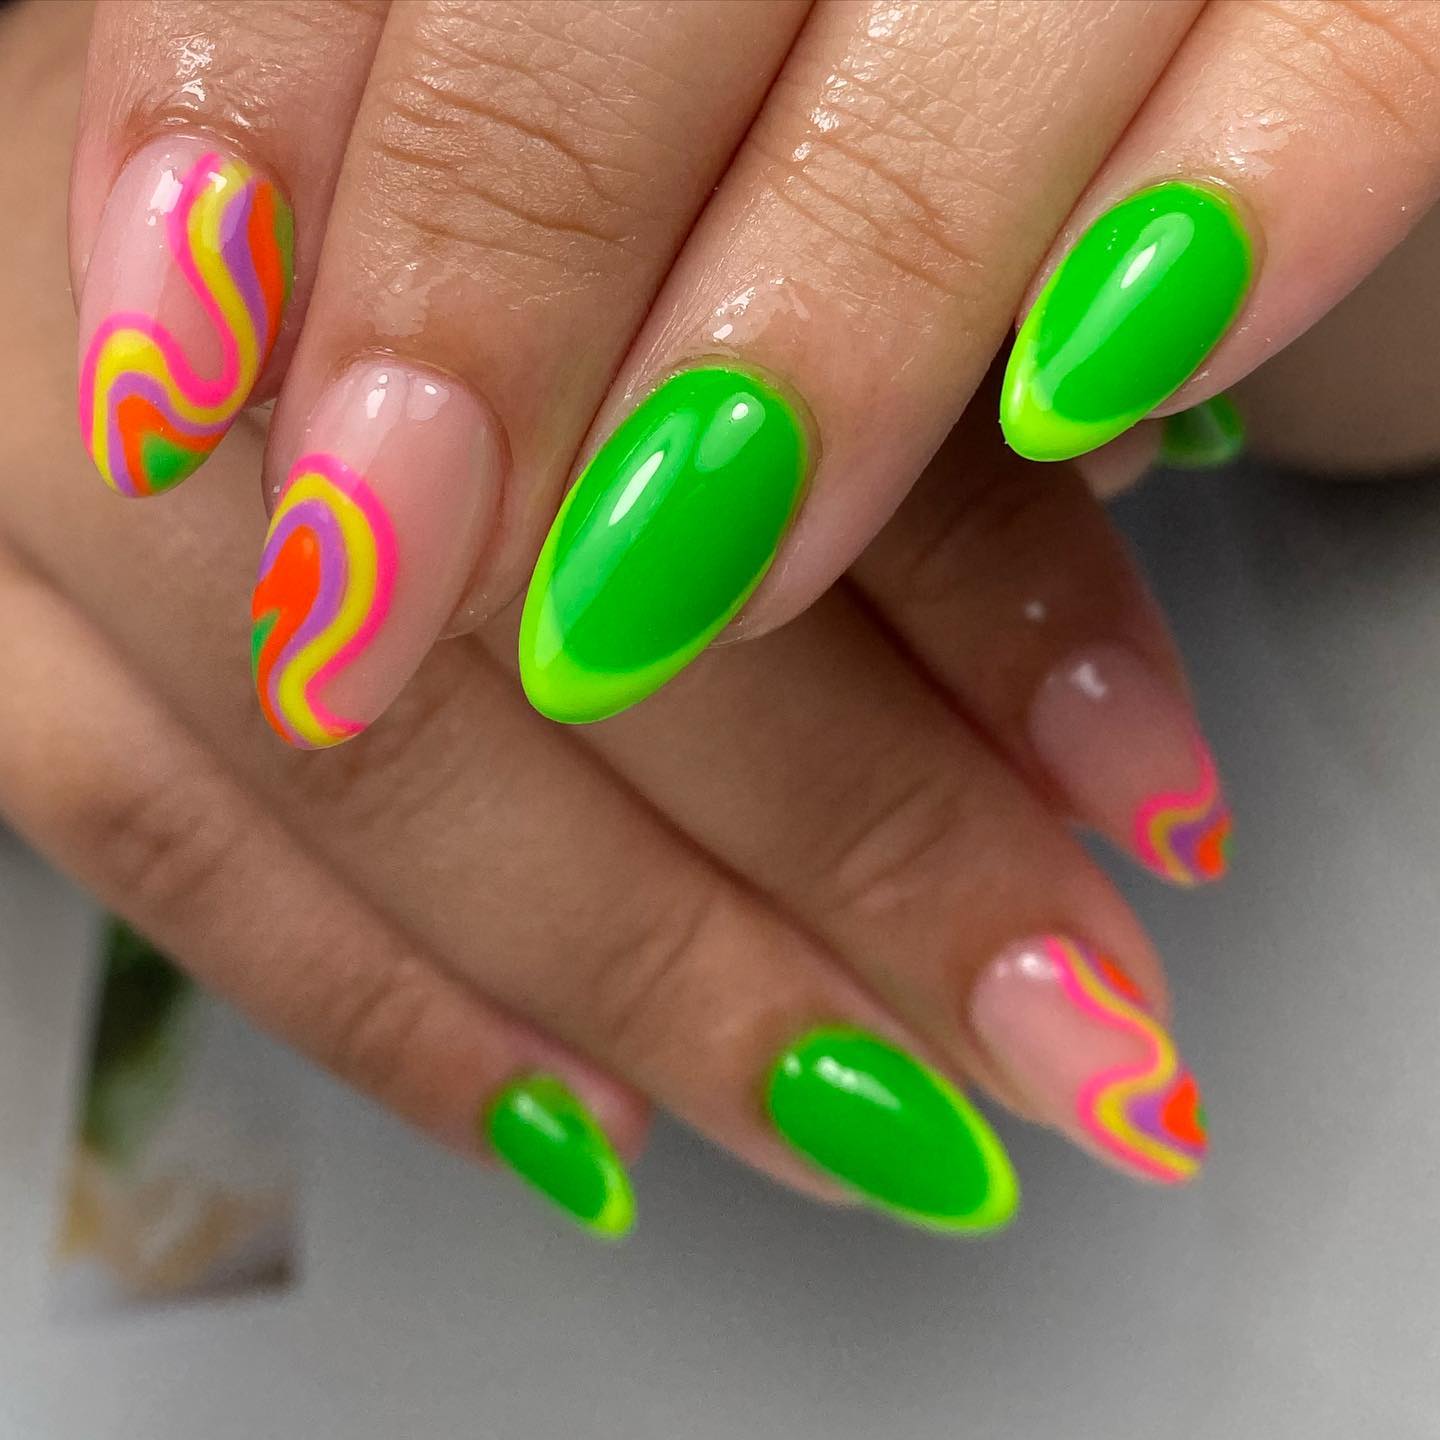 Hot neon rainbow nails such as these will attract a ton of attention and looks everywhere you go.